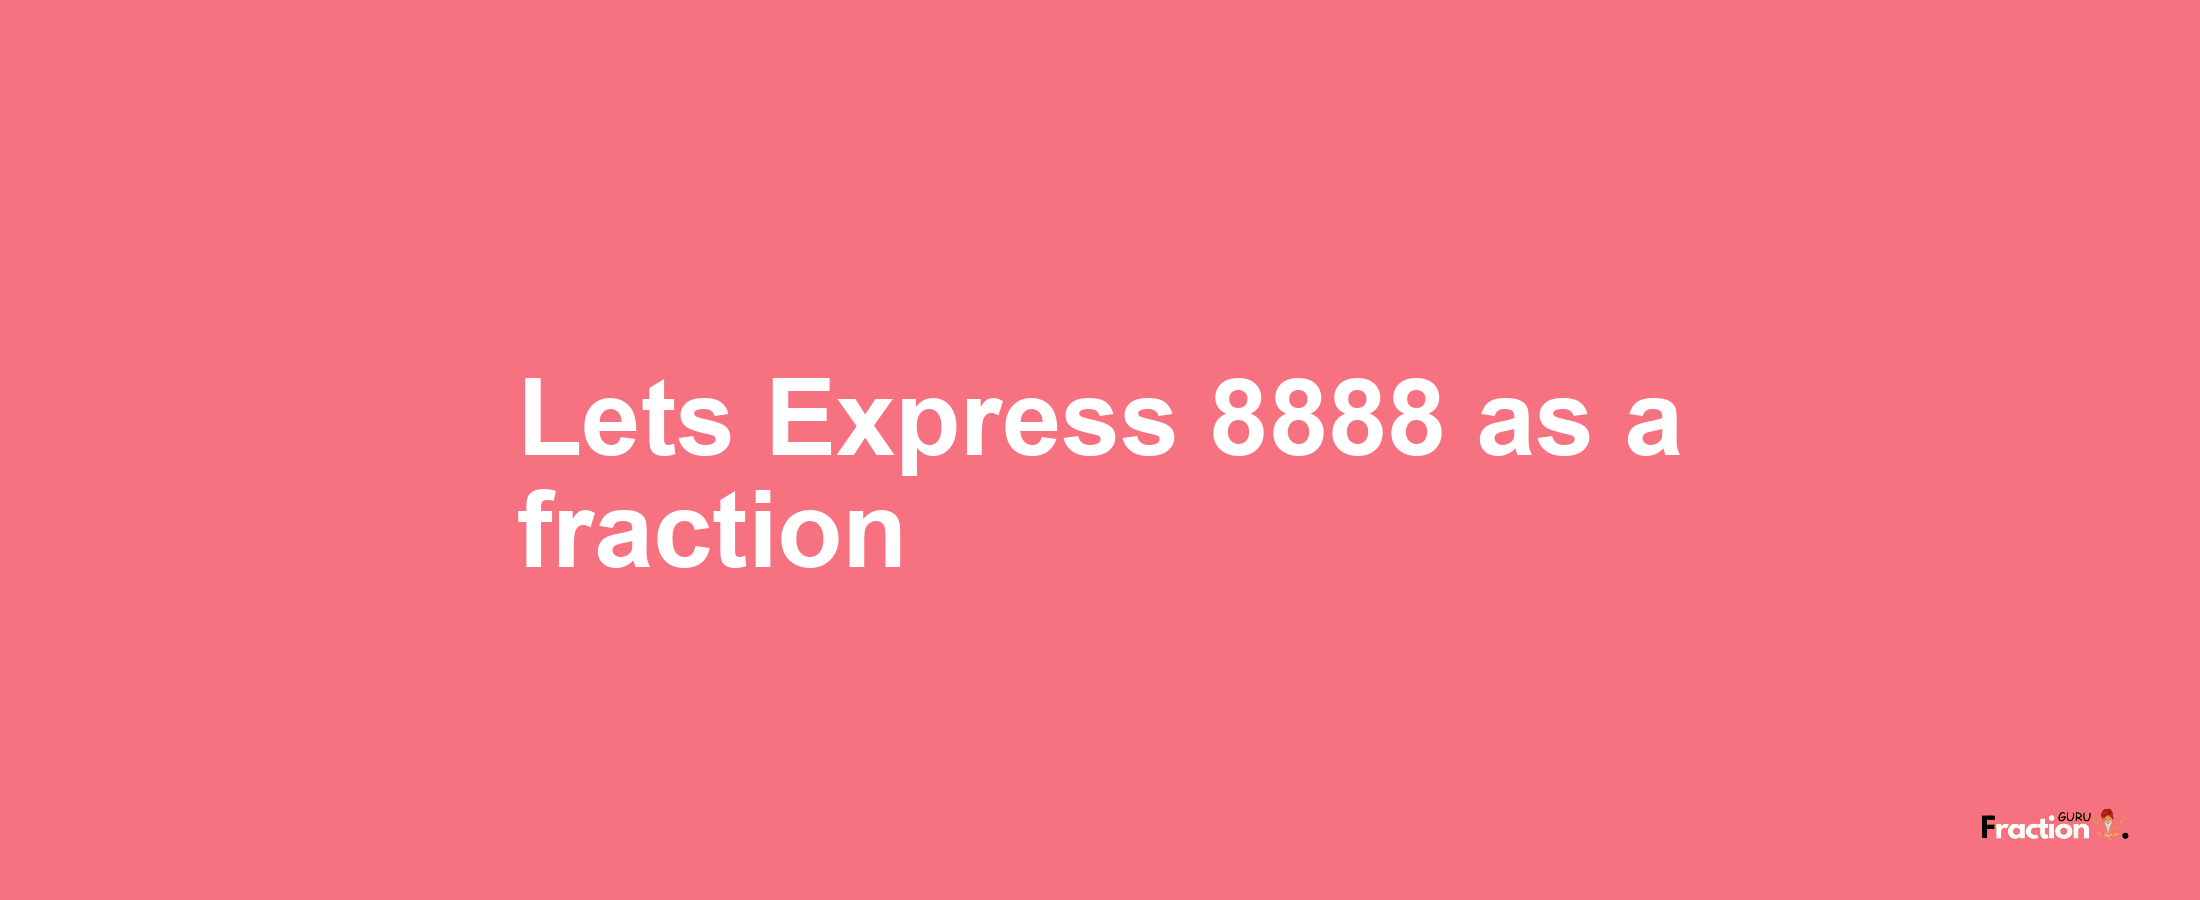 Lets Express 8888 as afraction